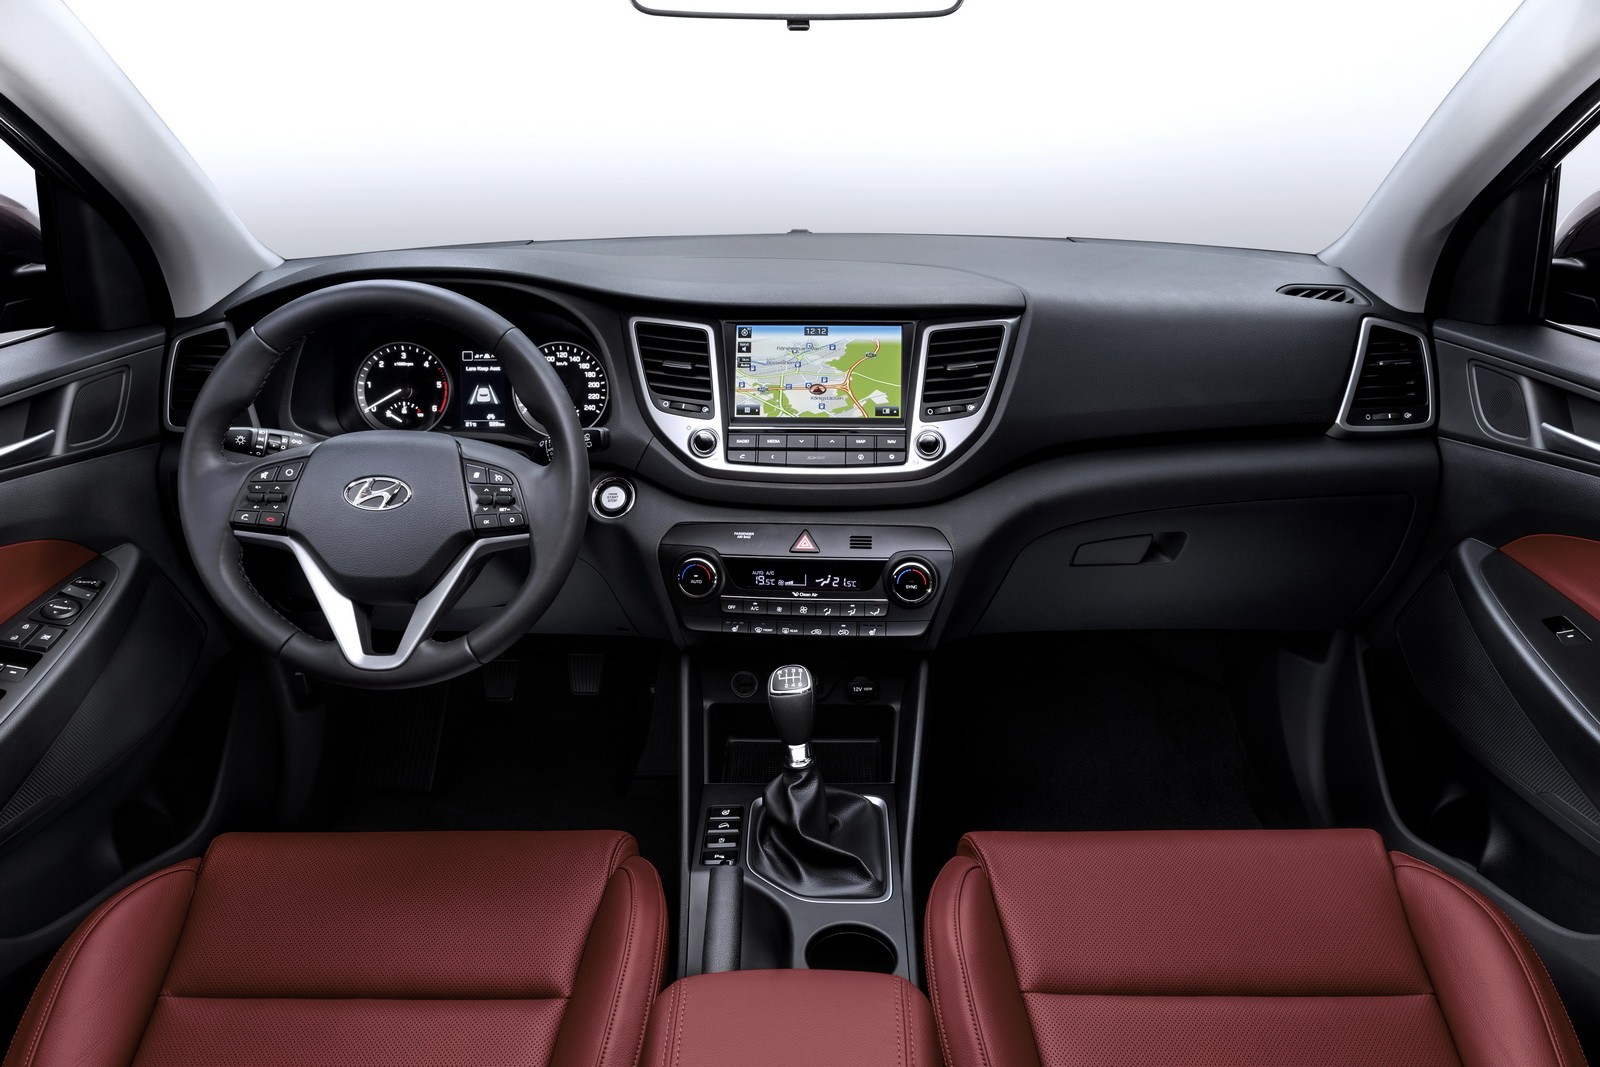 2015 Hyundai Tucson Interior décor with flair reflects your youthful style  4x4 SUV Hyundai هيونداي ا  Hyundai tucson Hyundai  Tucson interior